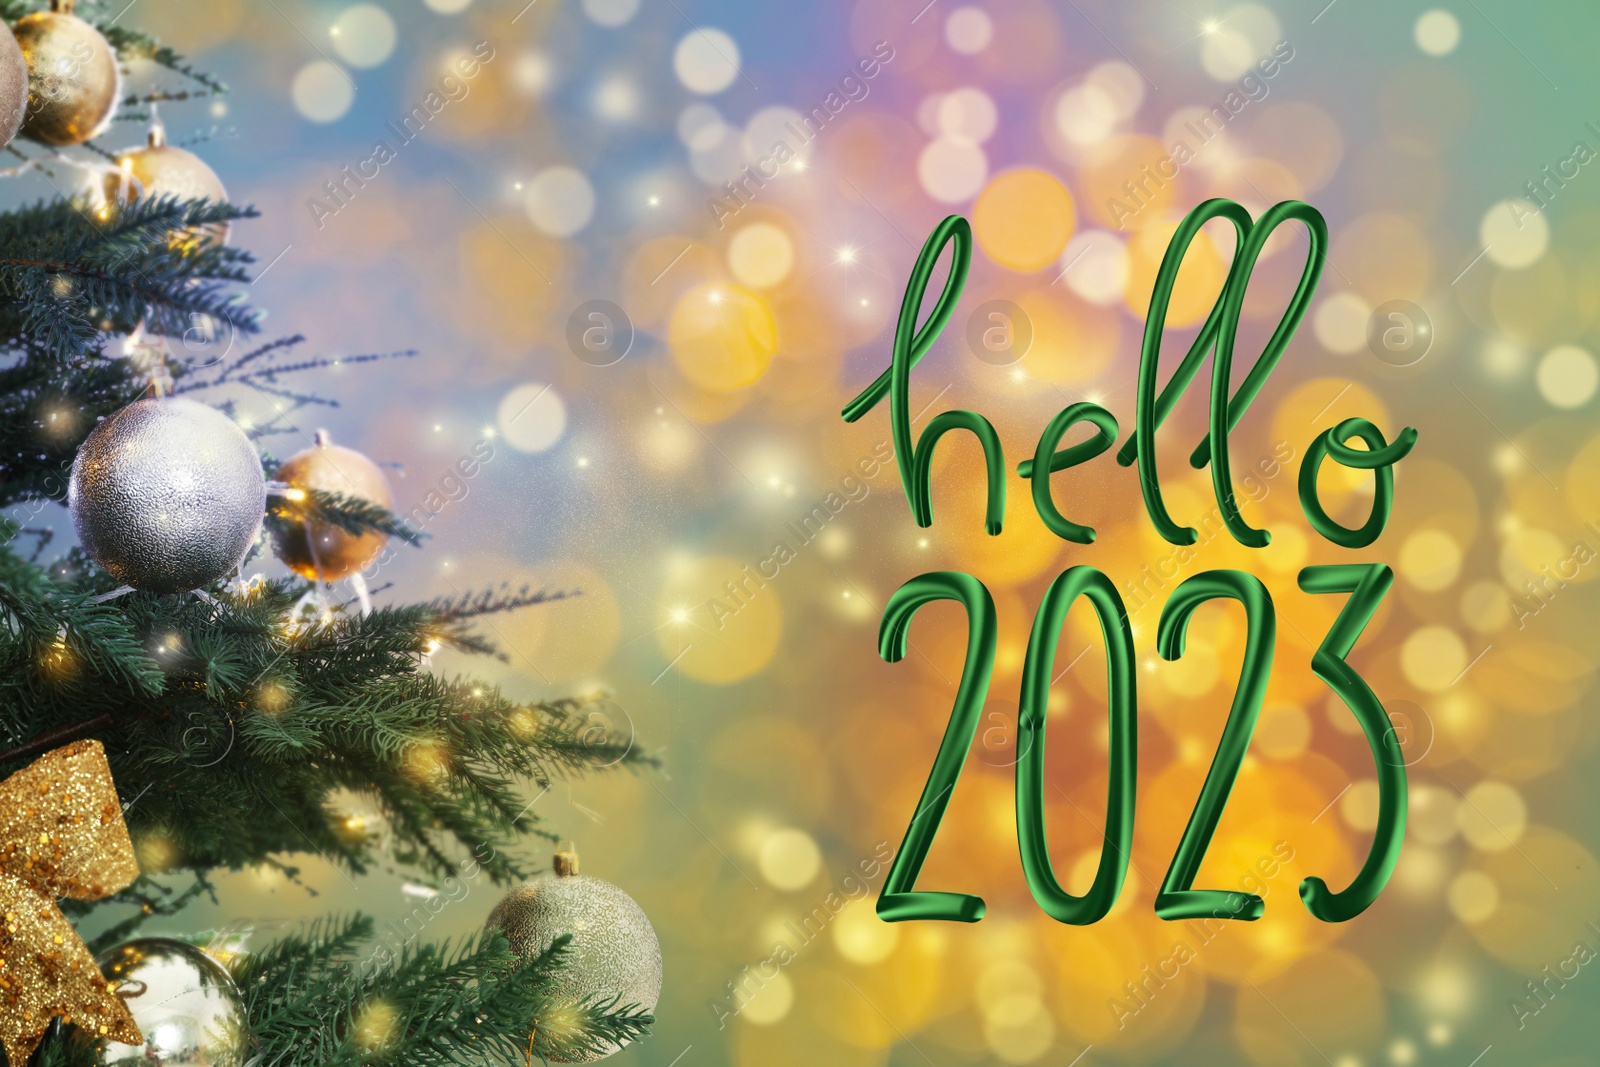 Image of Hello 2023. Beautiful Christmas tree with bright baubles against blurred festive lights